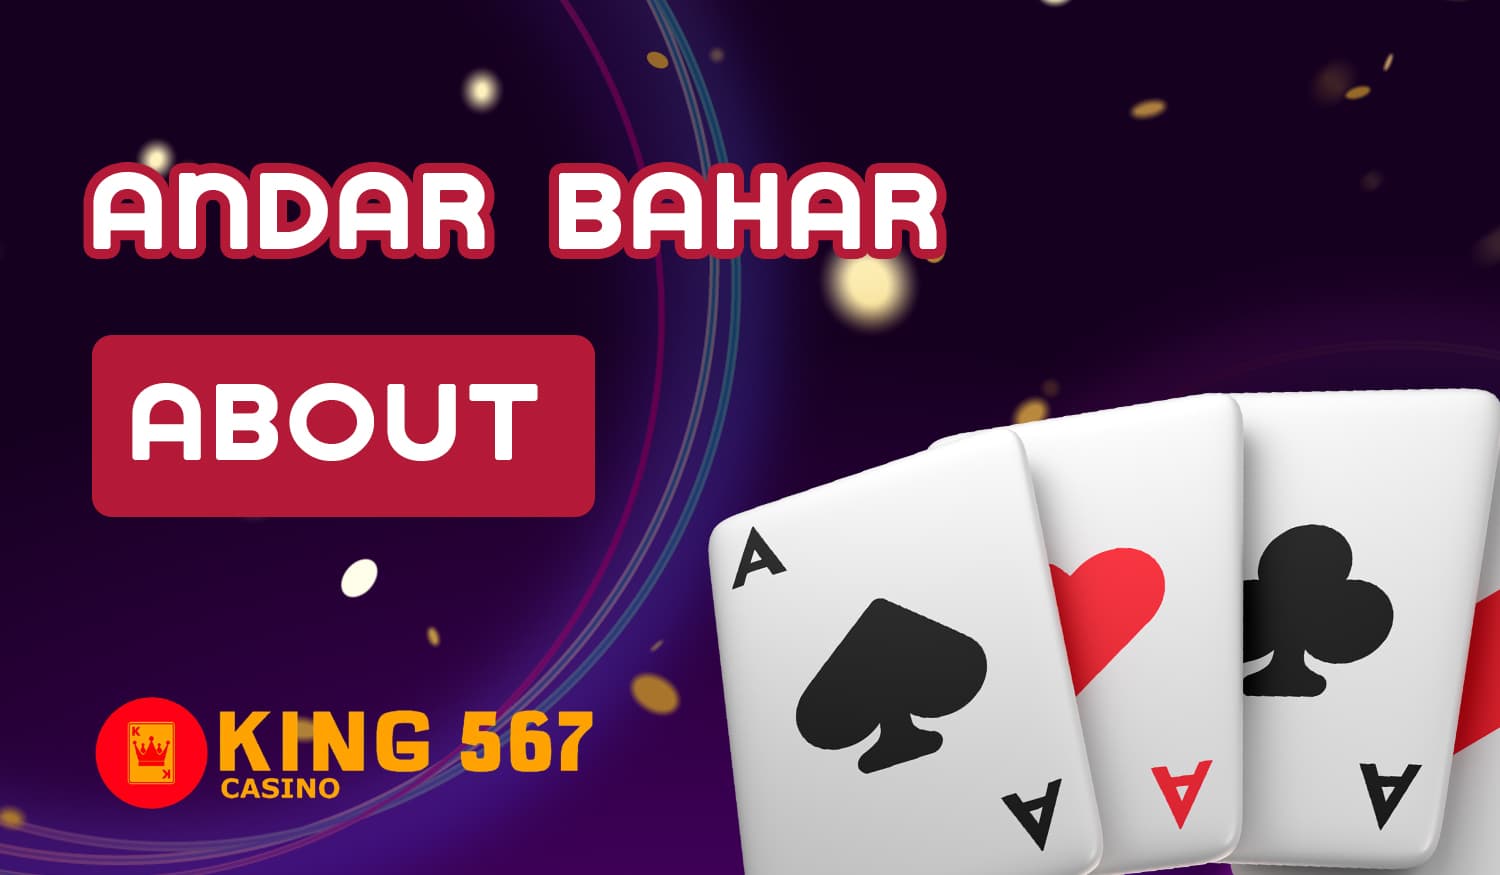 Andar Bahar features on King 567 Casino